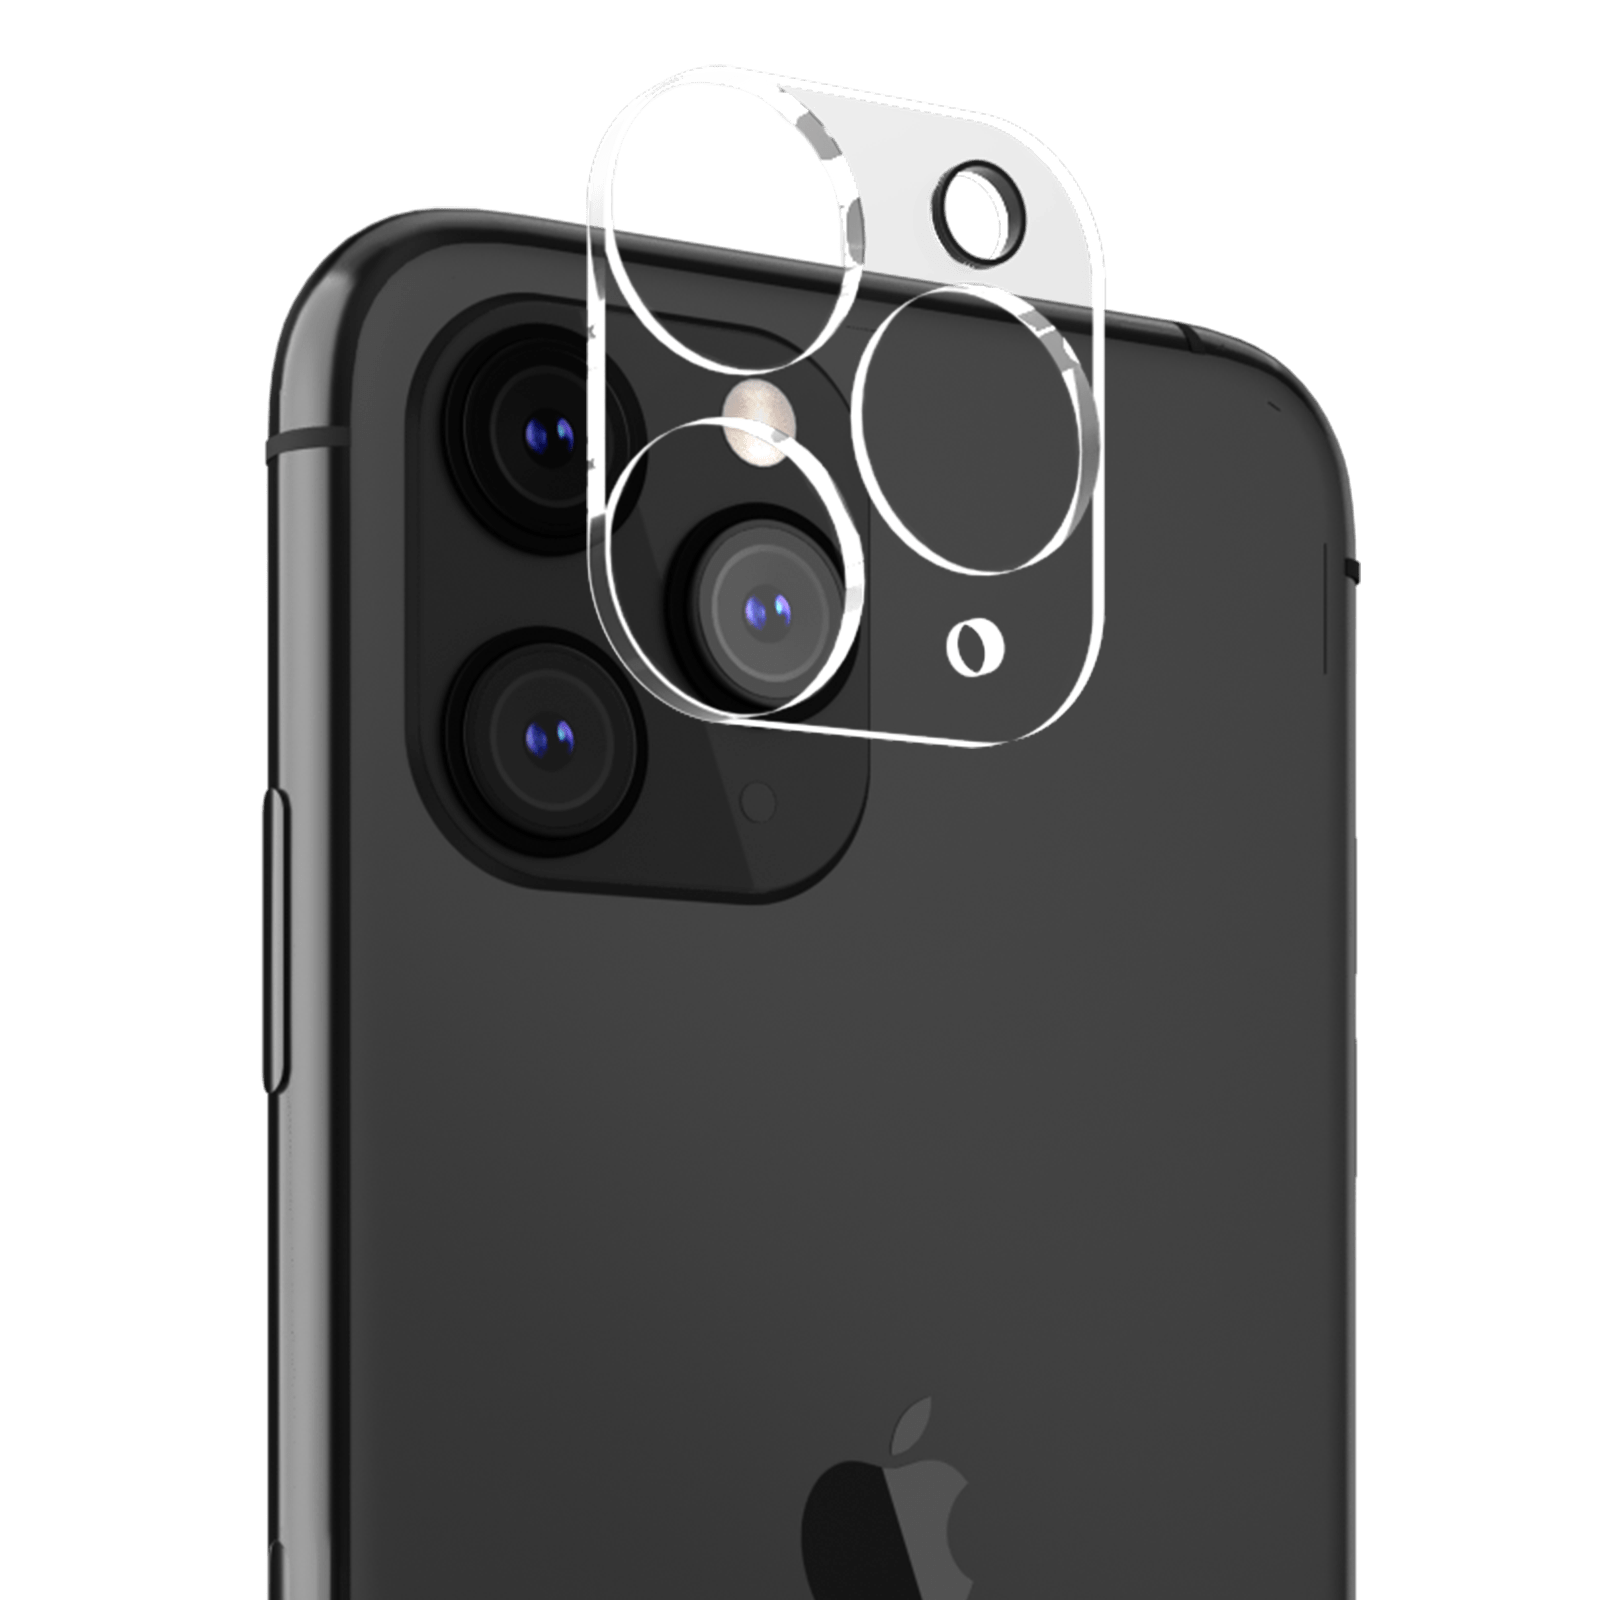 Camera Lens Protector for iPhone 11 Pro & 11 Pro Max – Pelican Phone Cases